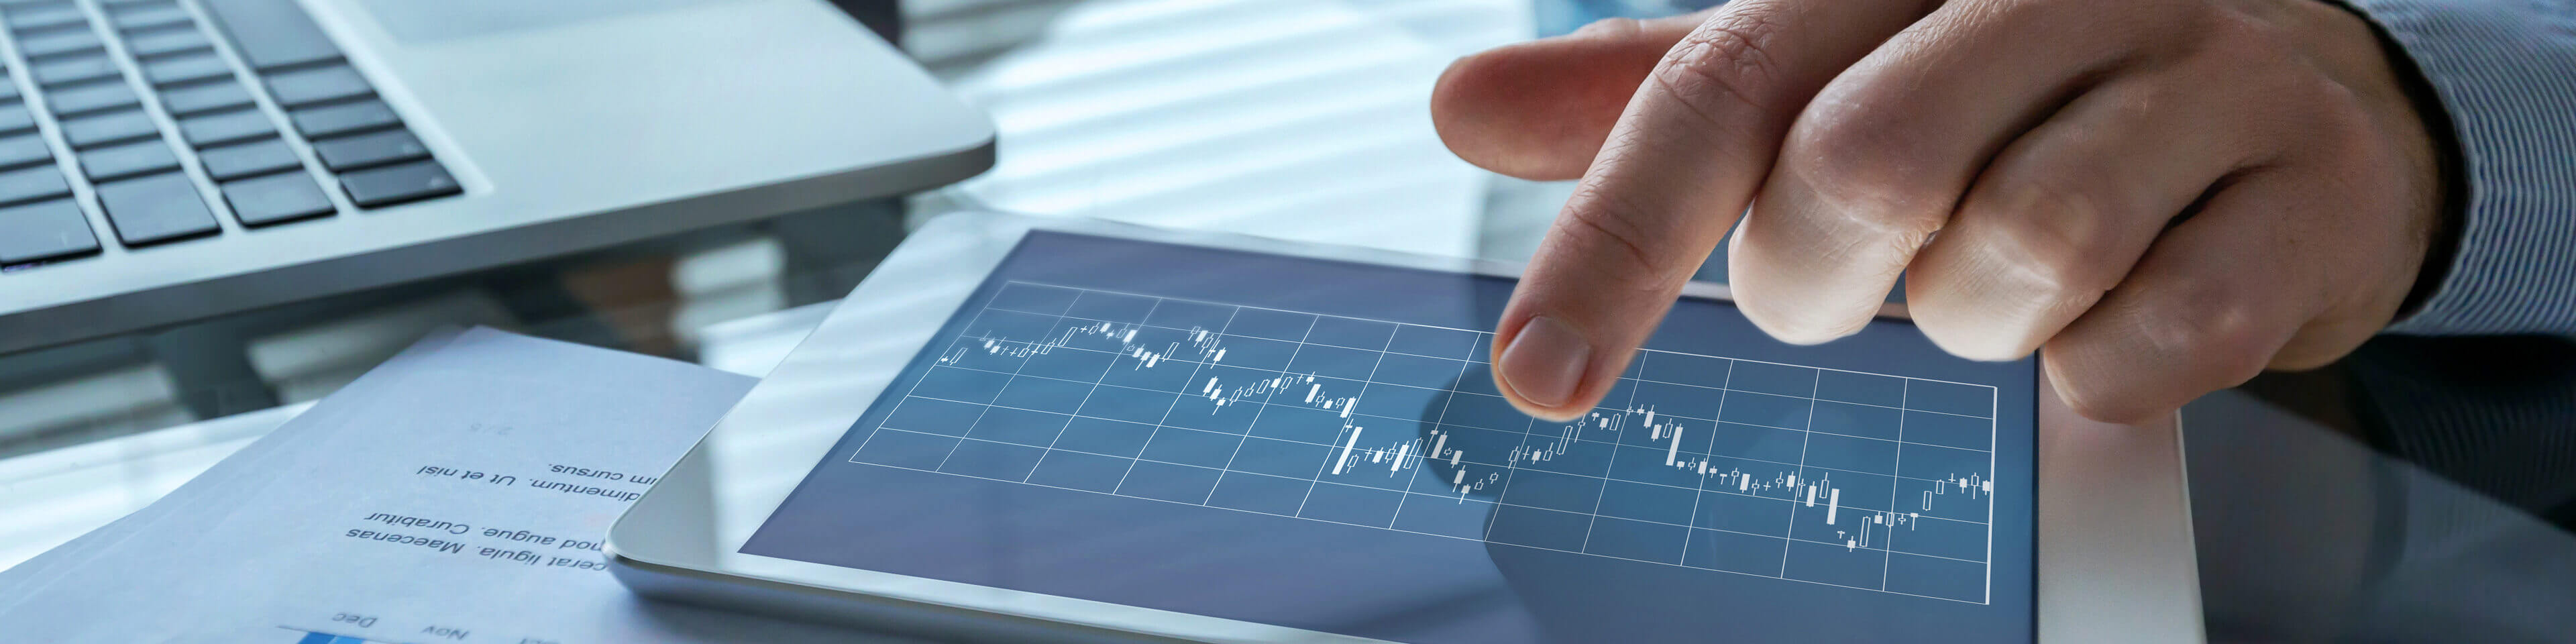 man's hand touching tablet with data charts on it.